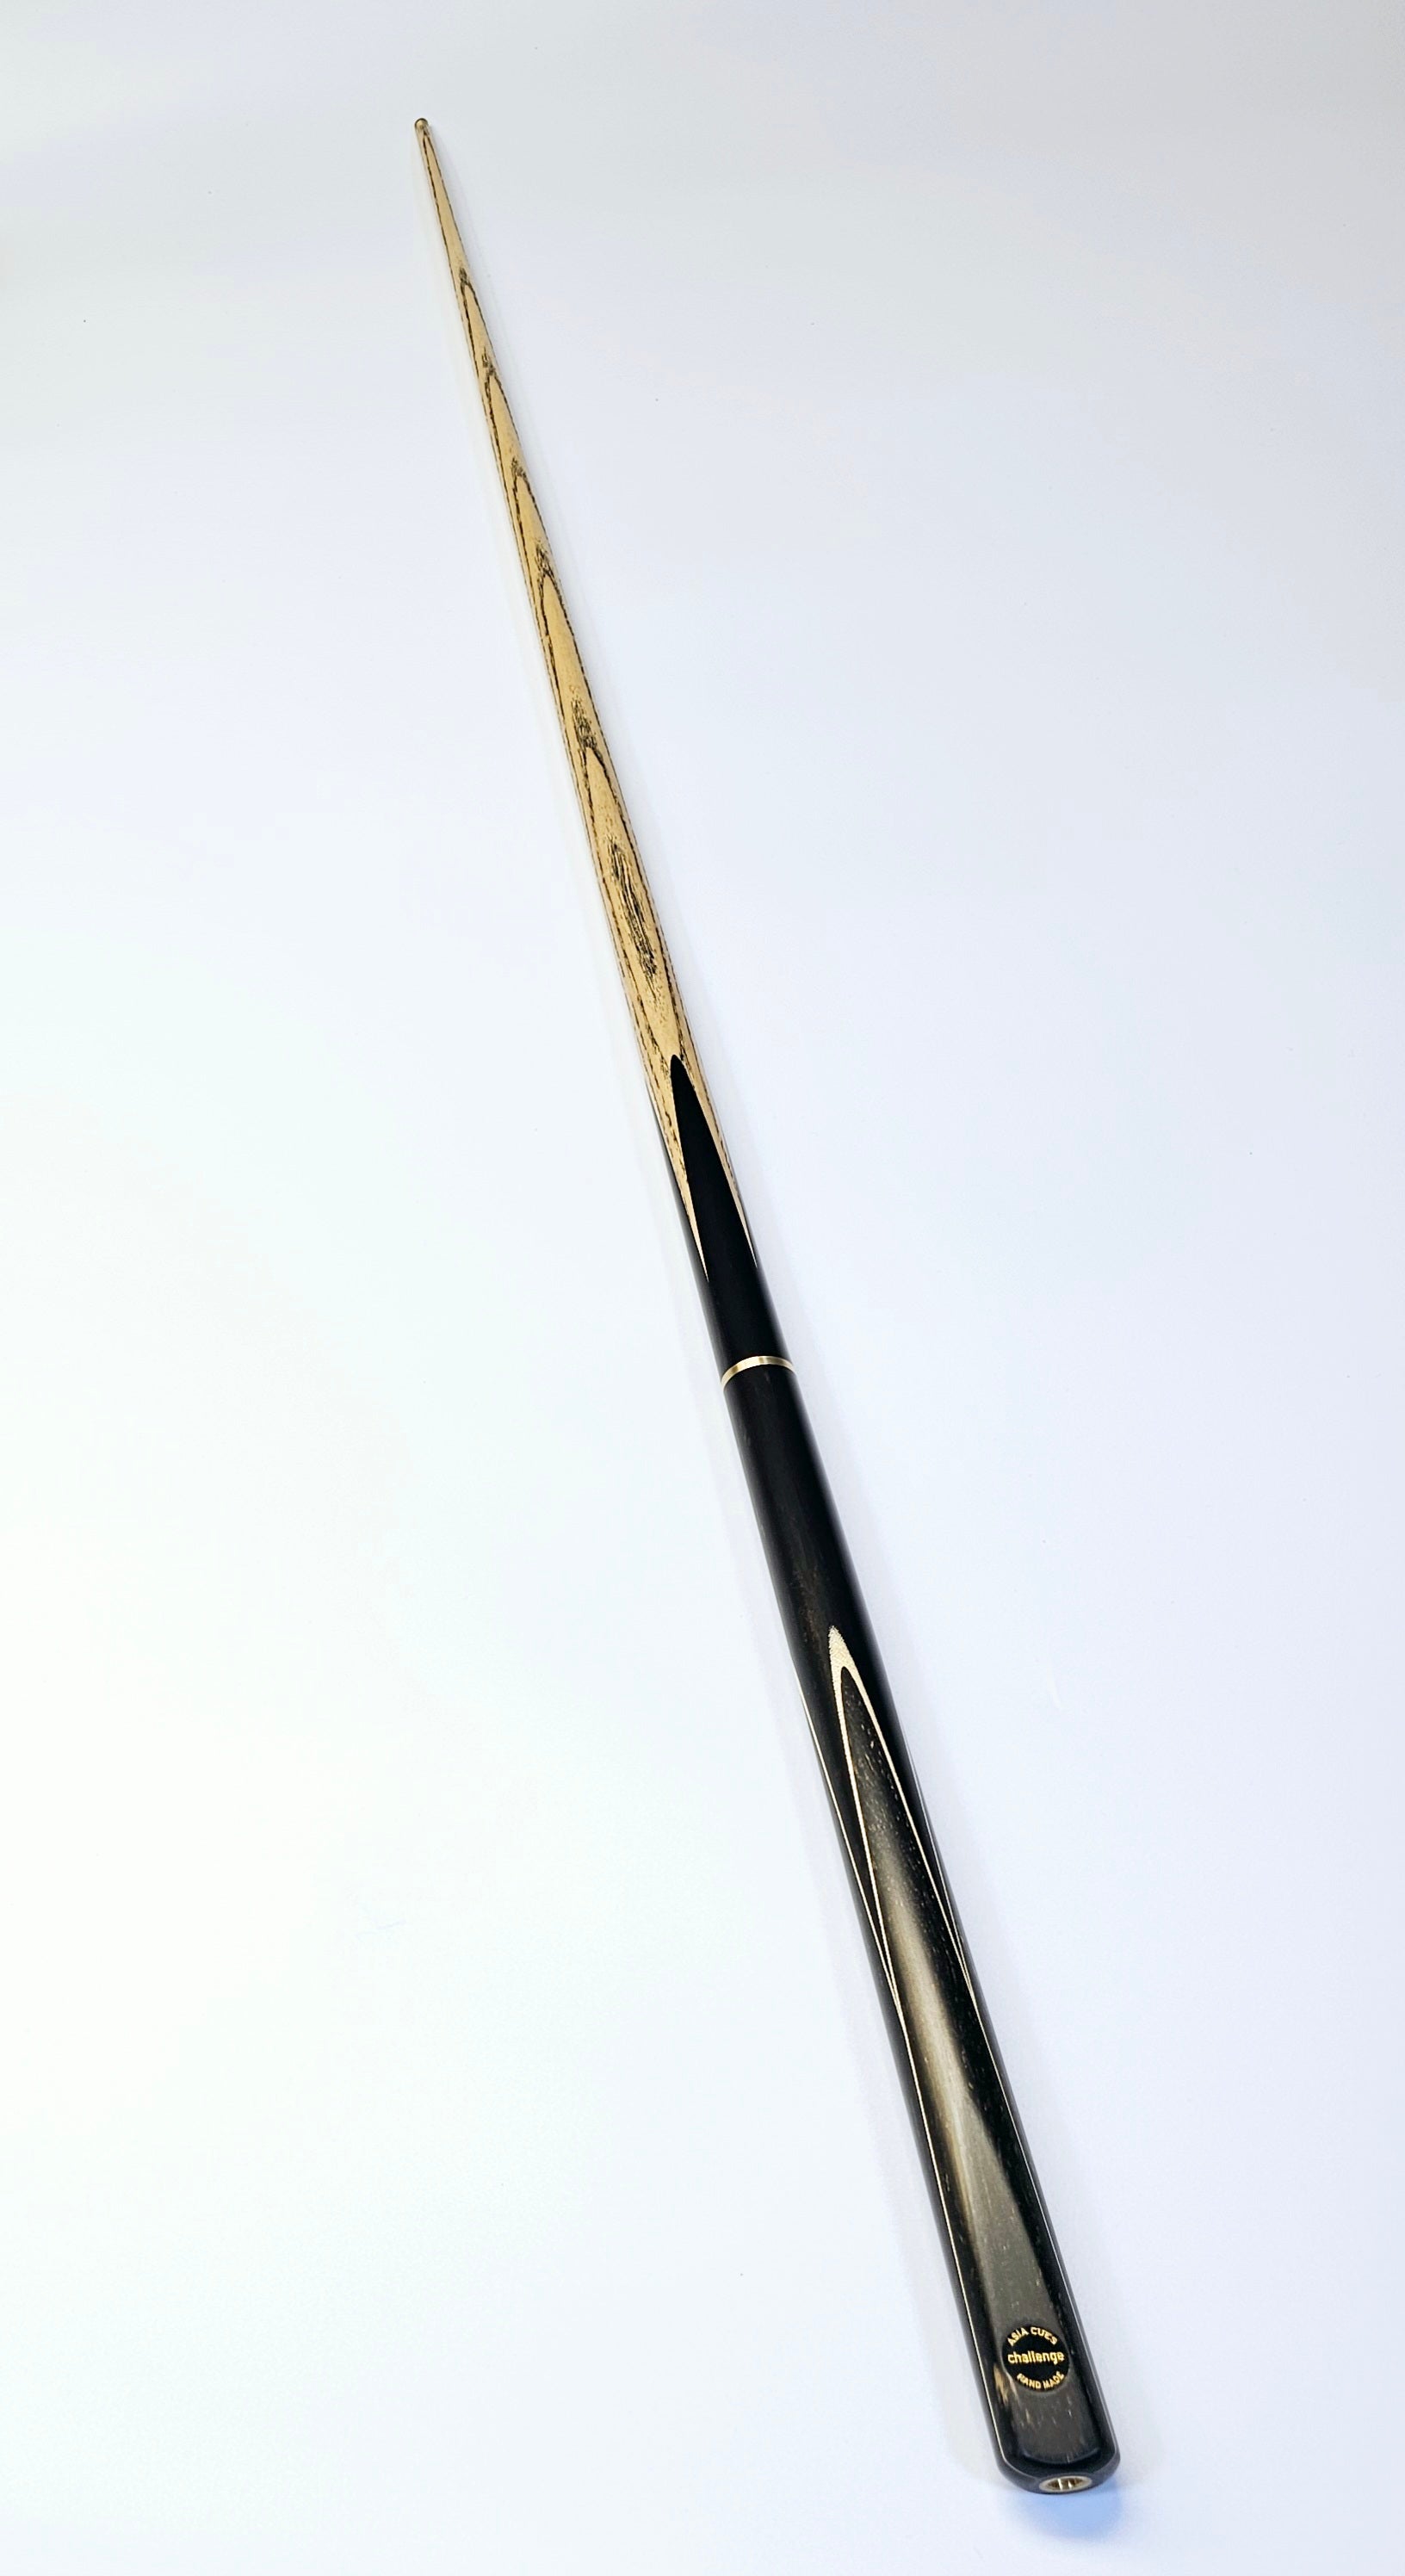 Asia Cues Challenge - 3/4 Jointed Snooker Cue 9.7mm Tip, 18.5oz, 58"